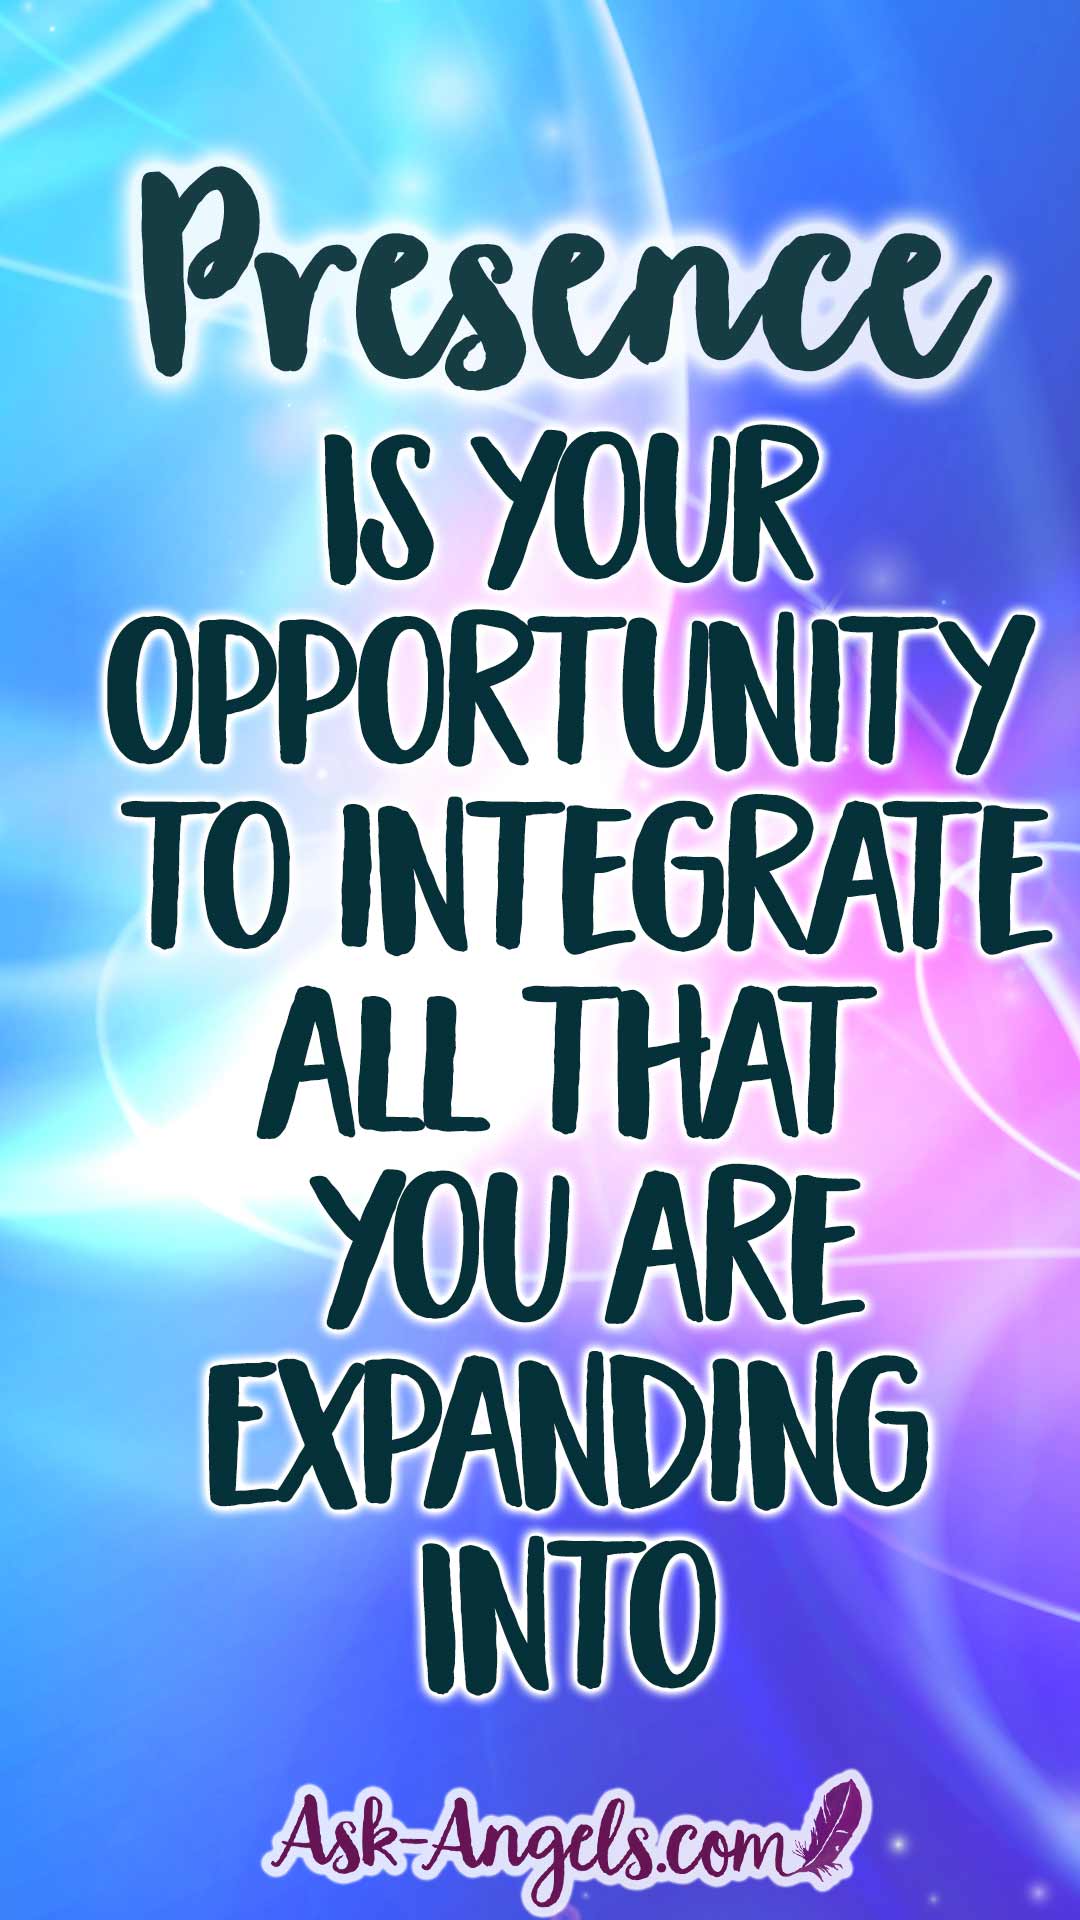 Spiritual Presence is your opportunity to integrate all that you are expanding into.